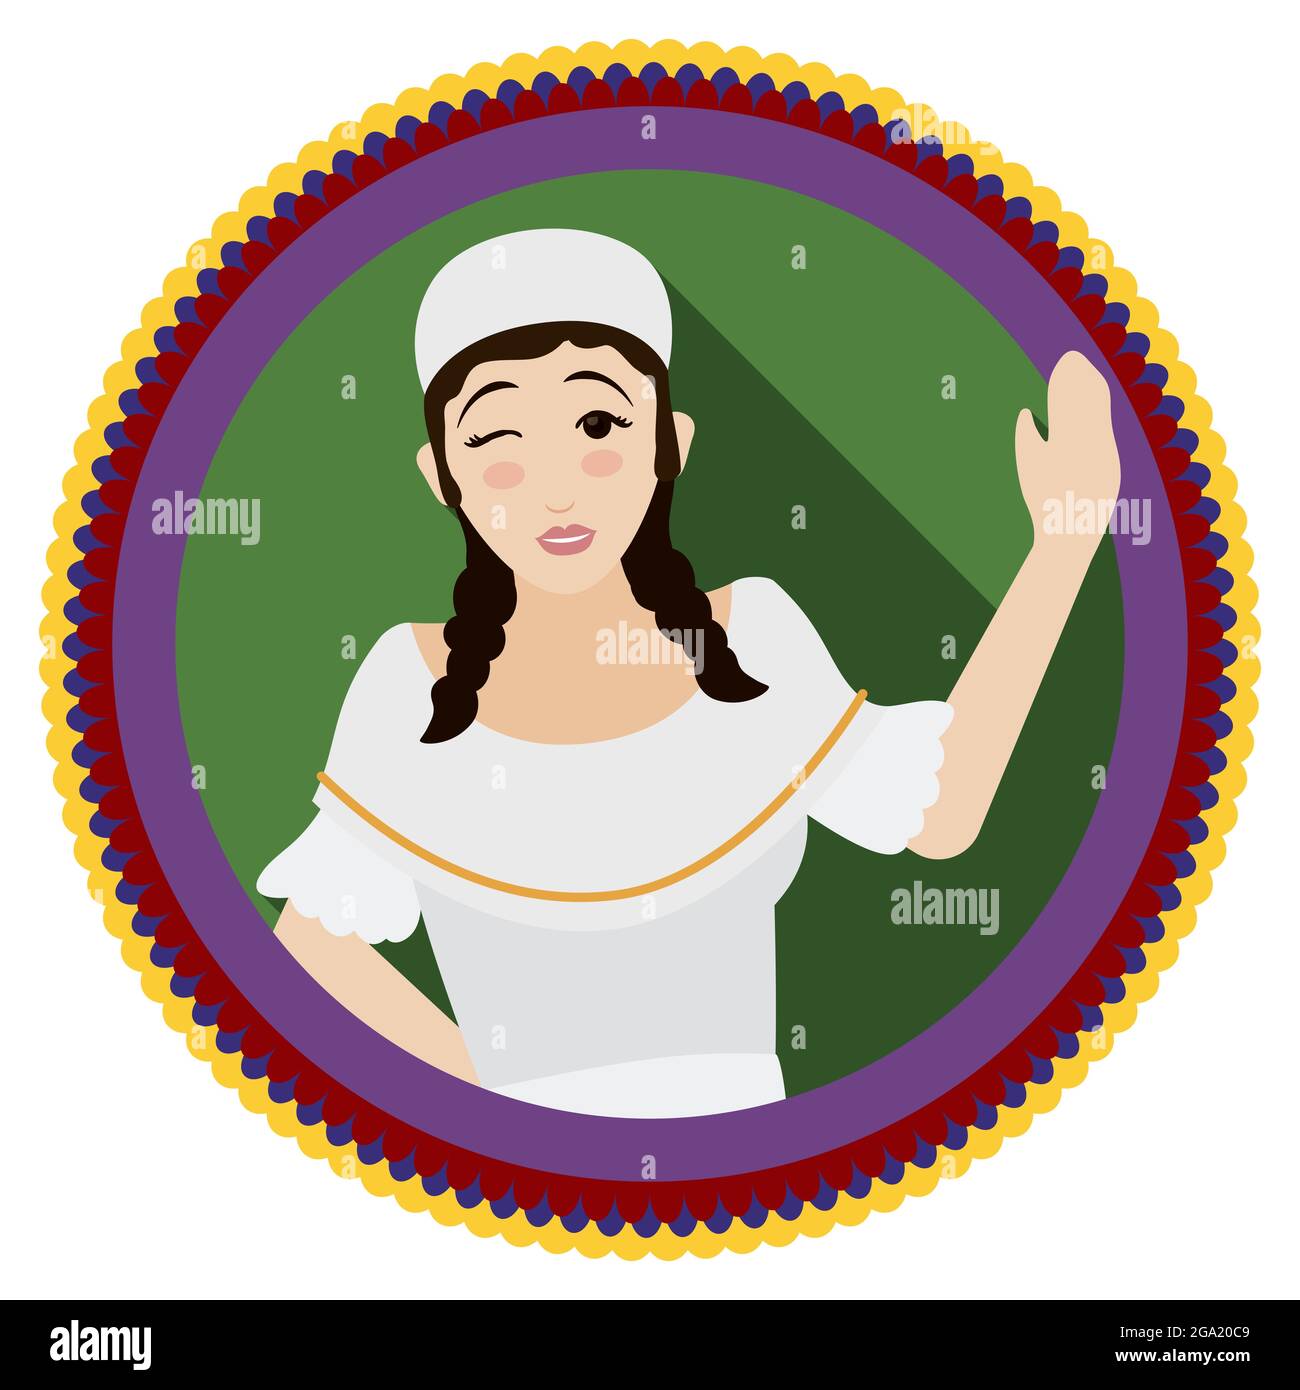 Beautiful Colombian woman winking at you in traditional paisa attire, inside a round button with Colombia flag colors. Stock Vector